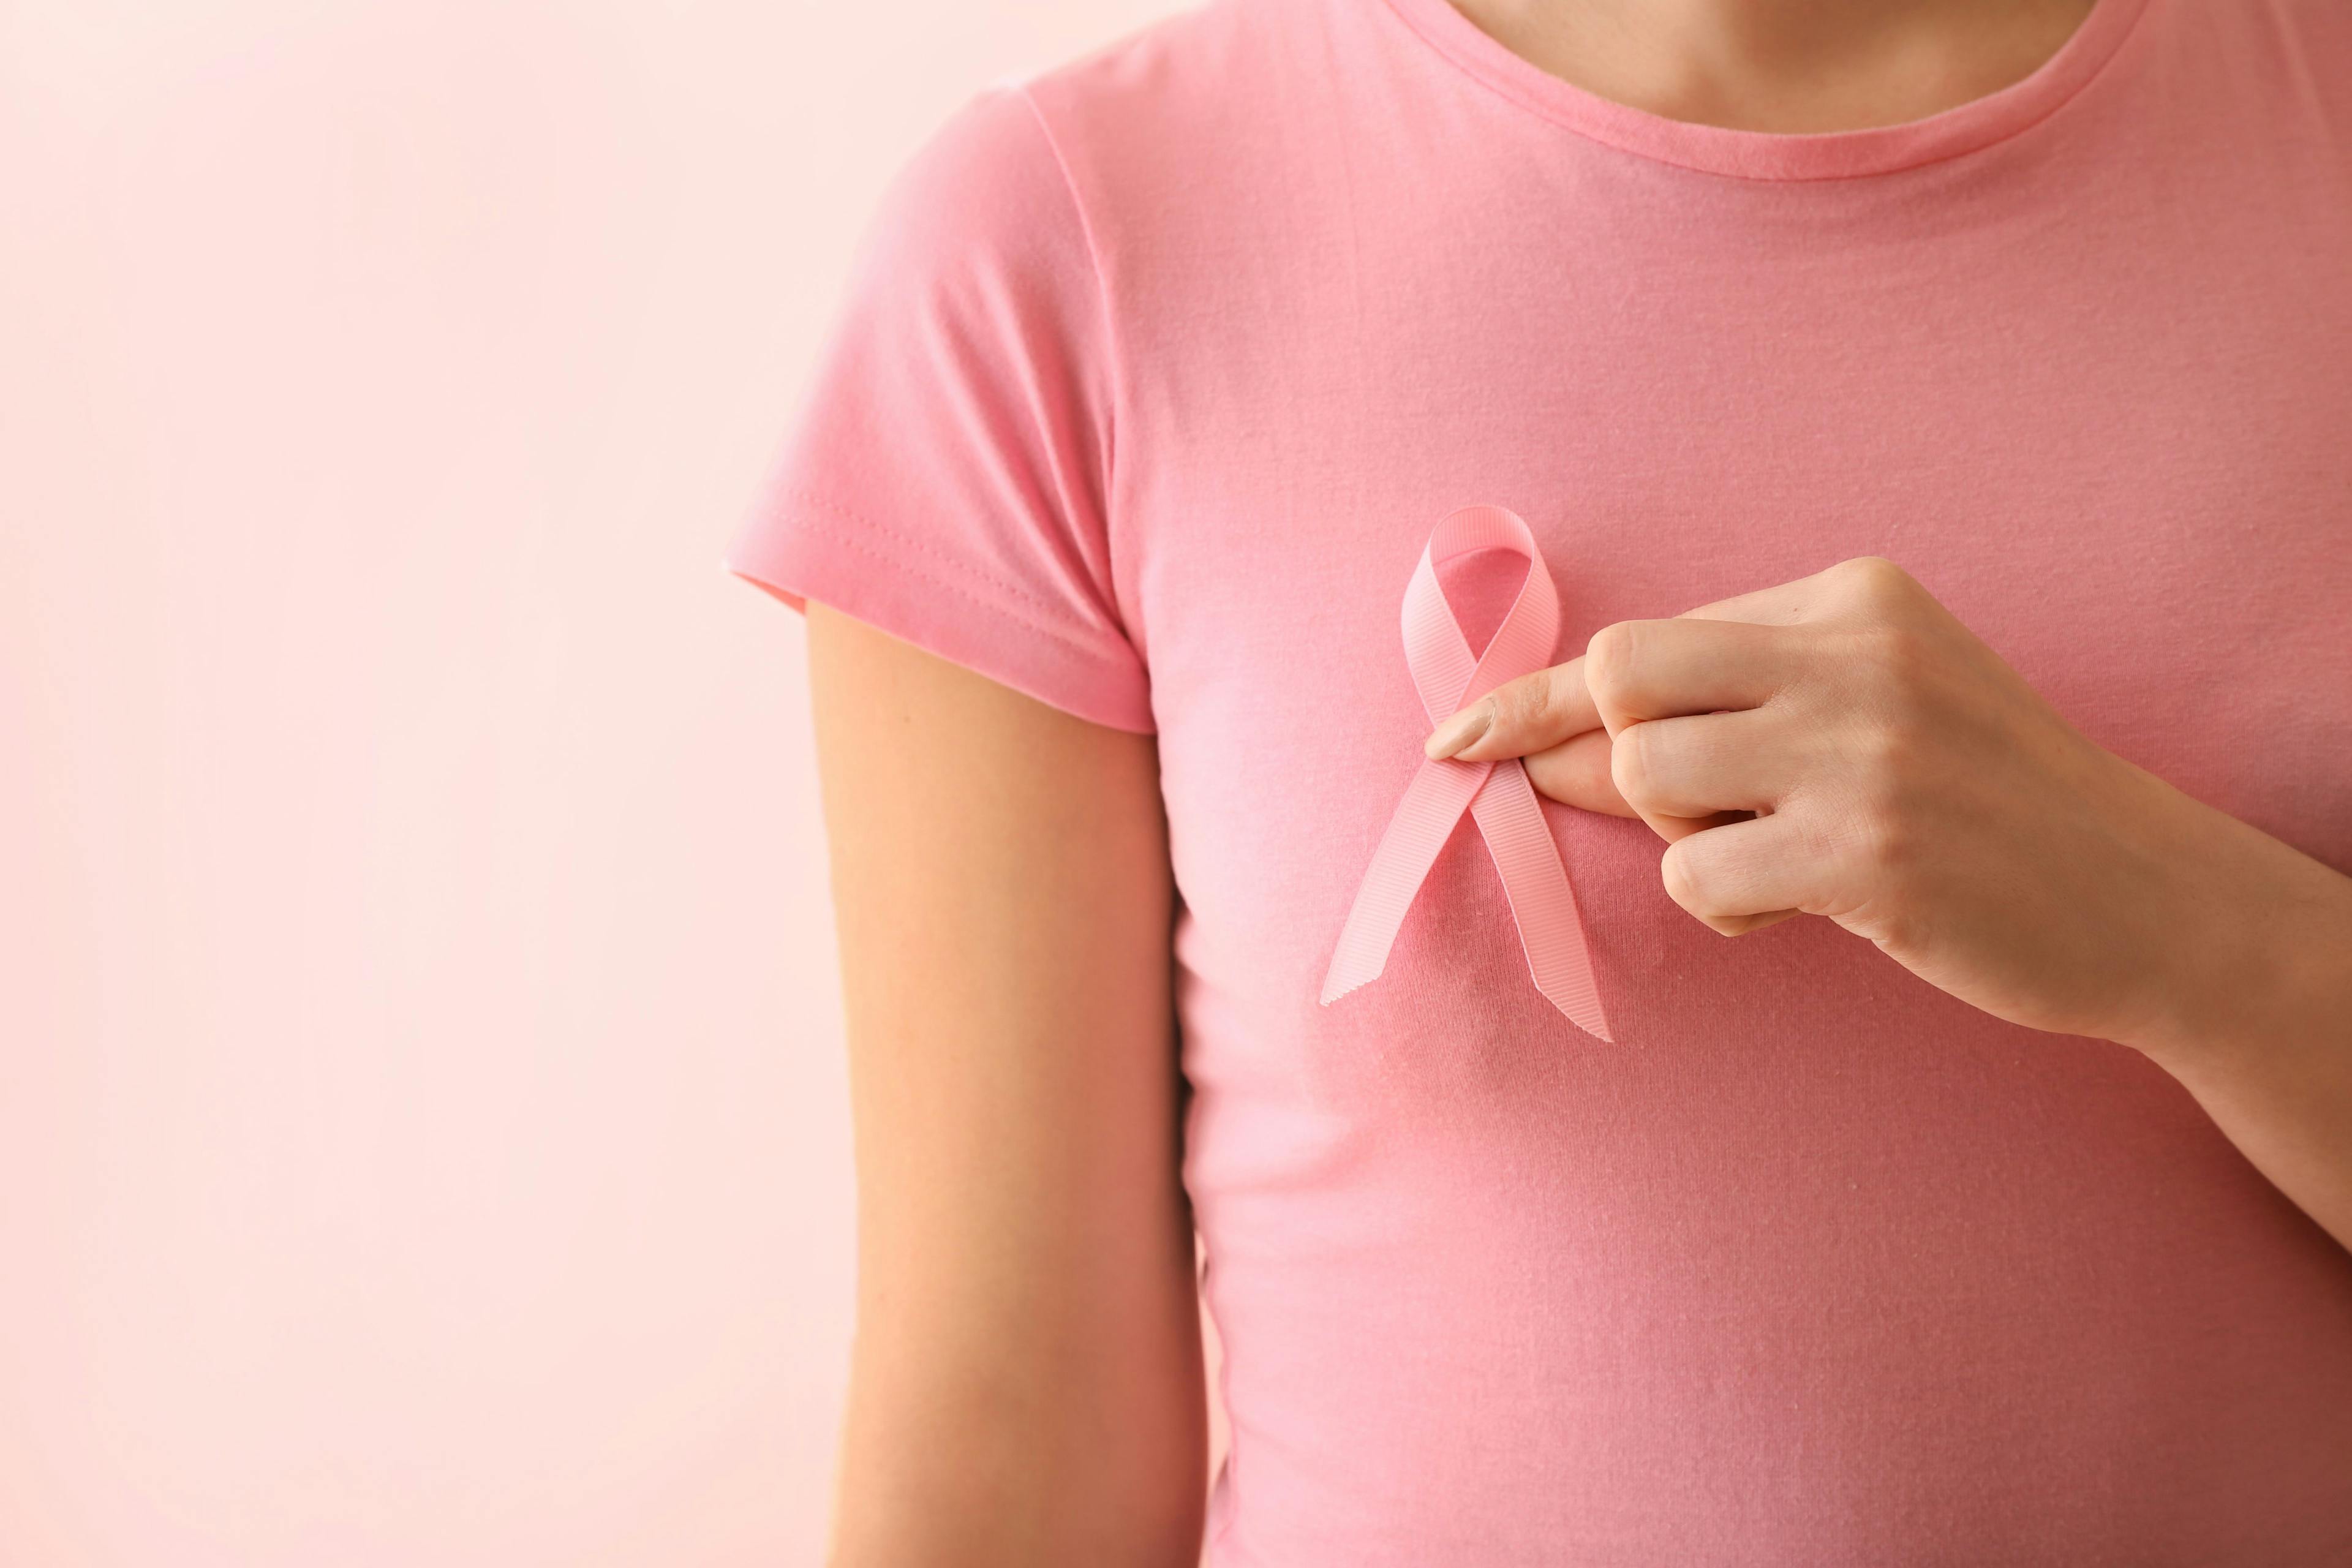 Woman holding a pink ribbon for breast cancer awareness